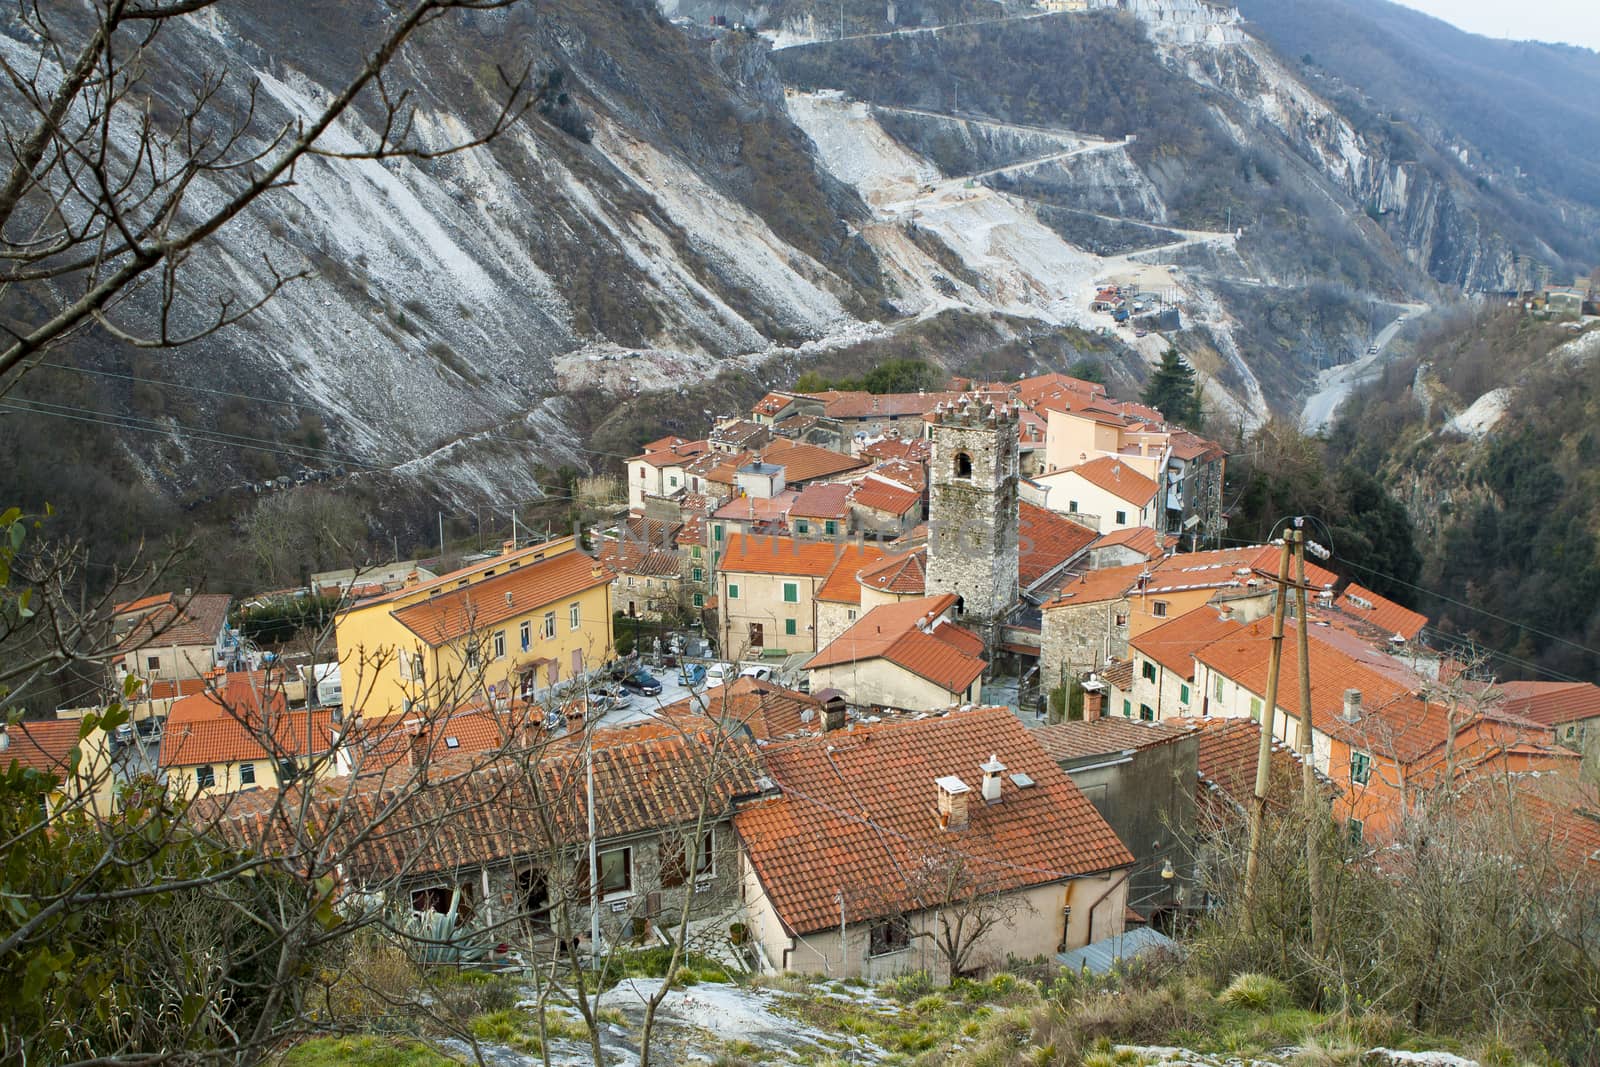 Ancient town set in the marblr quarries, famous for the production of lard